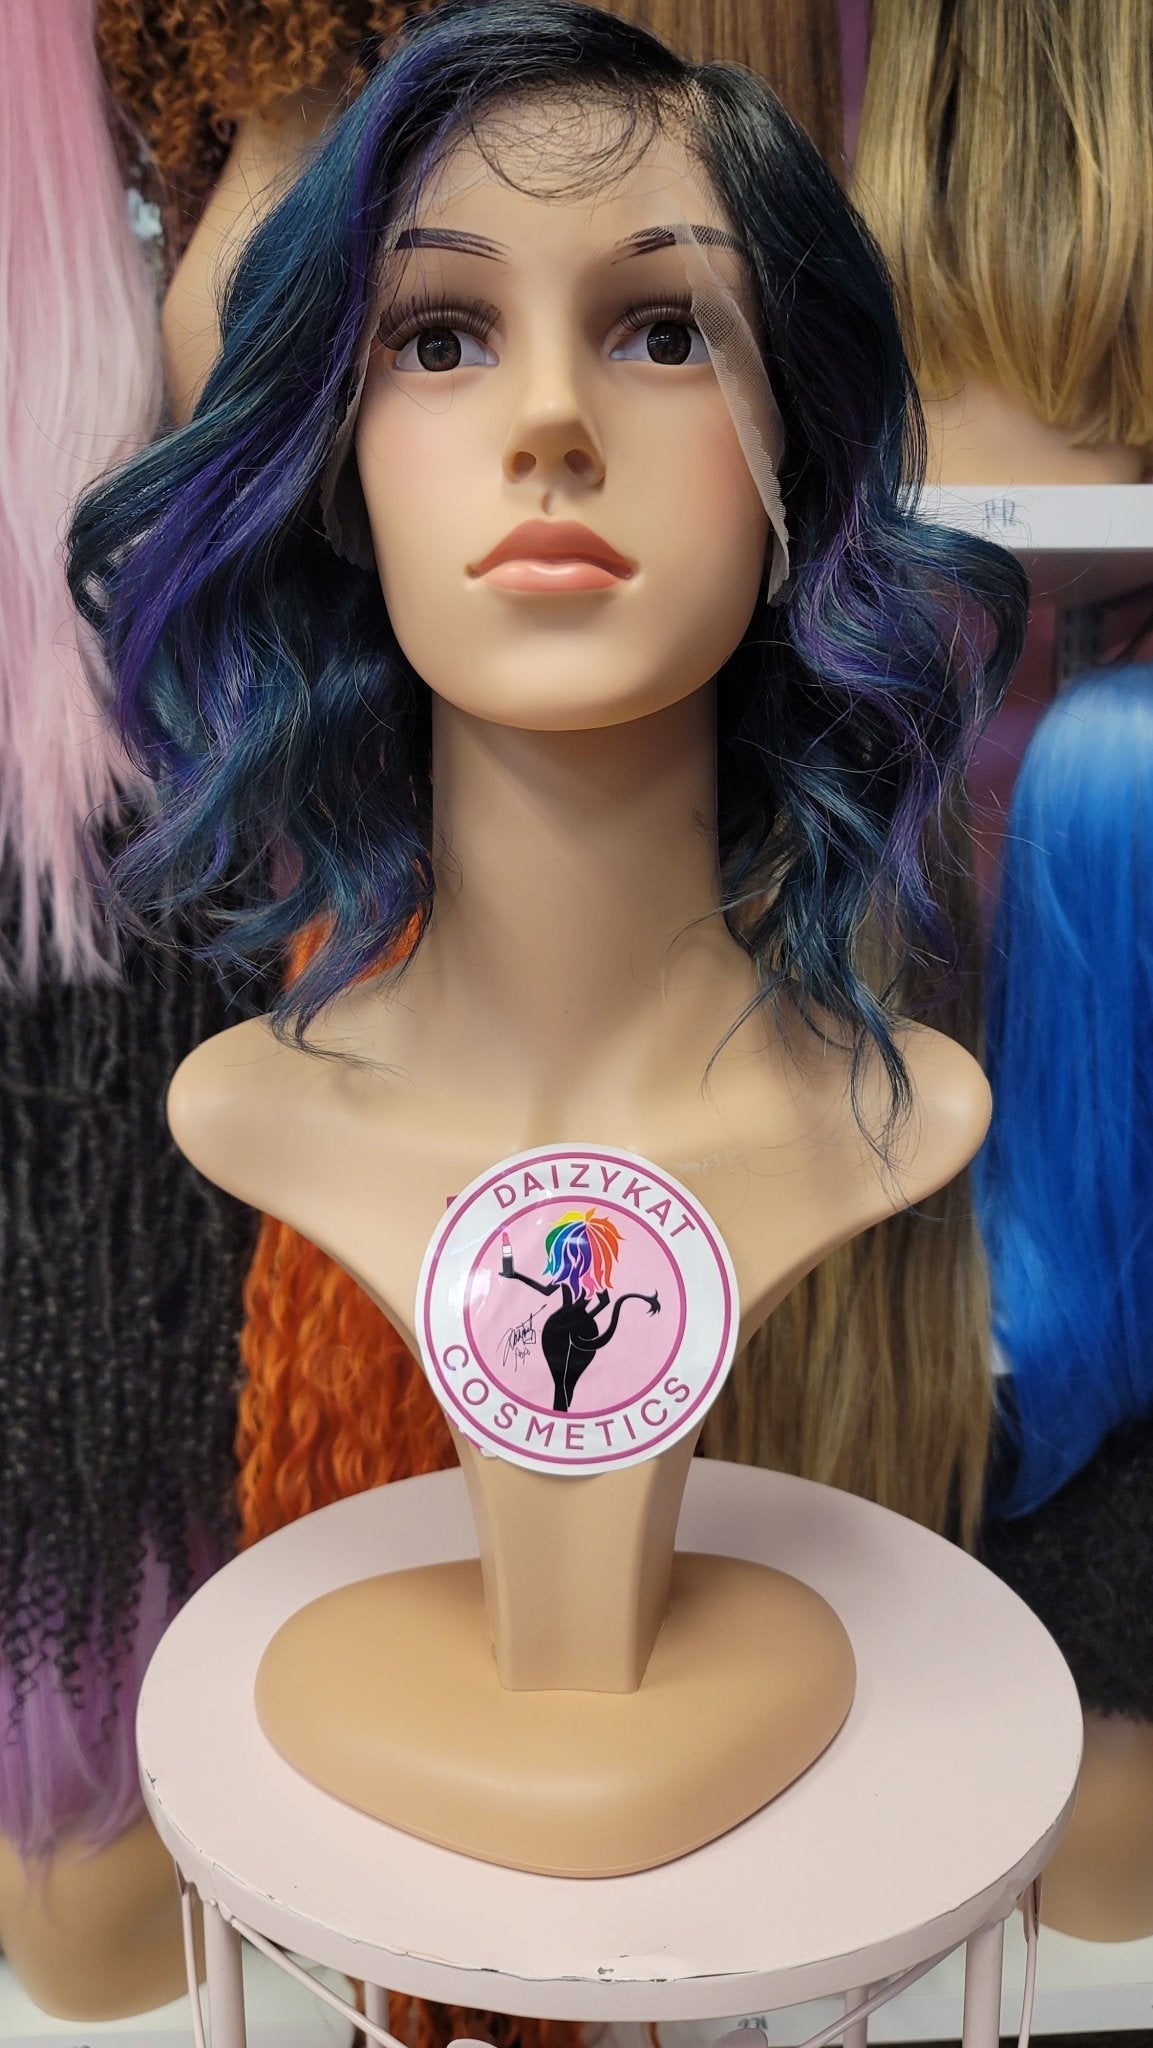 430 Maddy - 13x4 Free Part Lace Front Wig - PURP/GRN - DaizyKat Cosmetics 430 Maddy - 13x4 Free Part Lace Front Wig - PURP/GRN DaizyKat Cosmetics Wigs